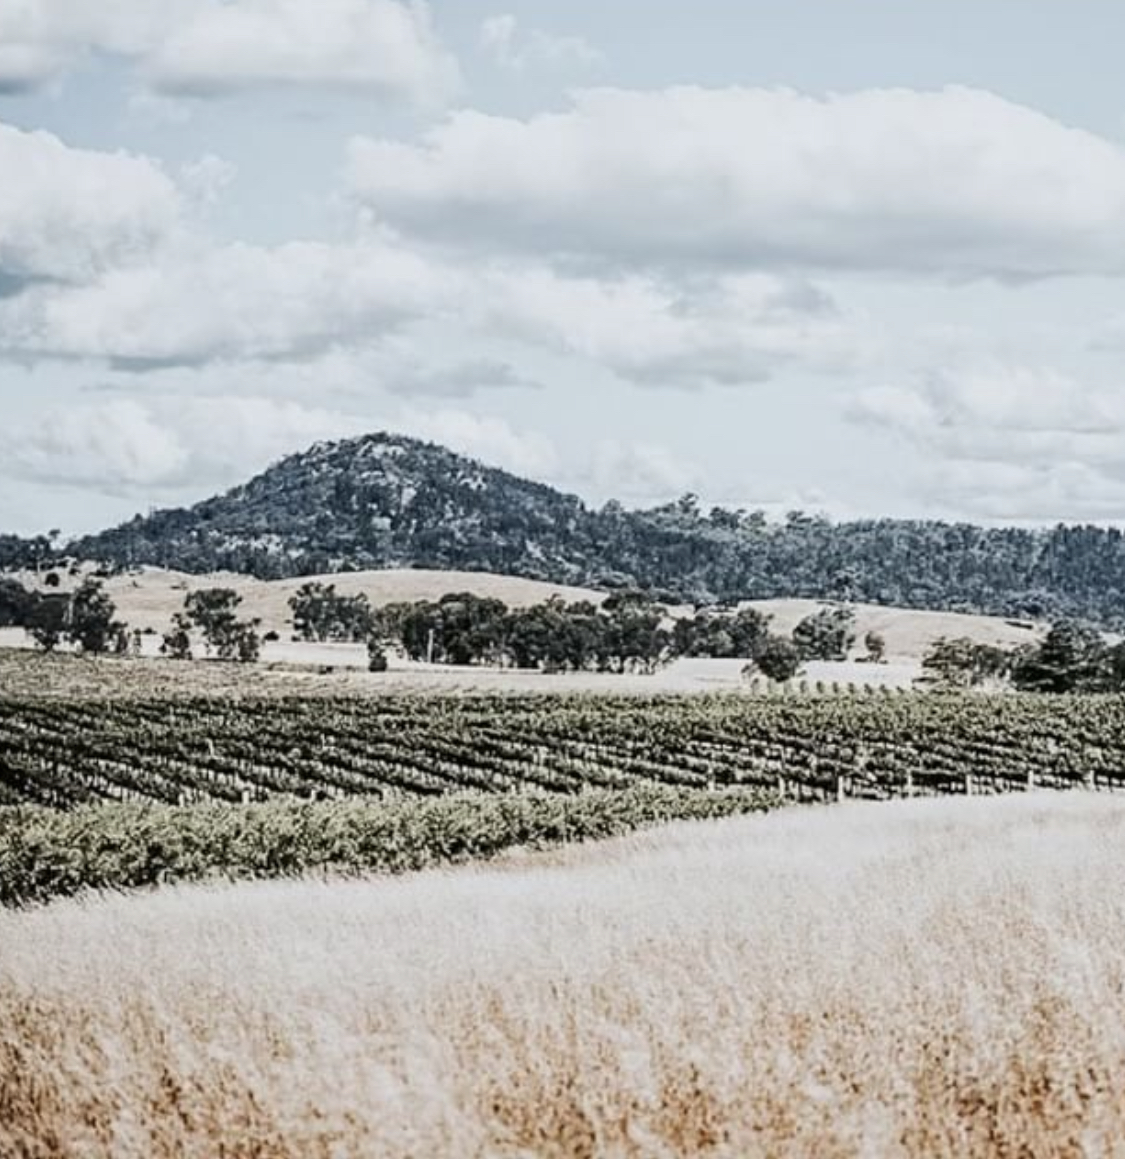 Thinking of relocating to Mudgee? Here’s our top four tips for tree-changers